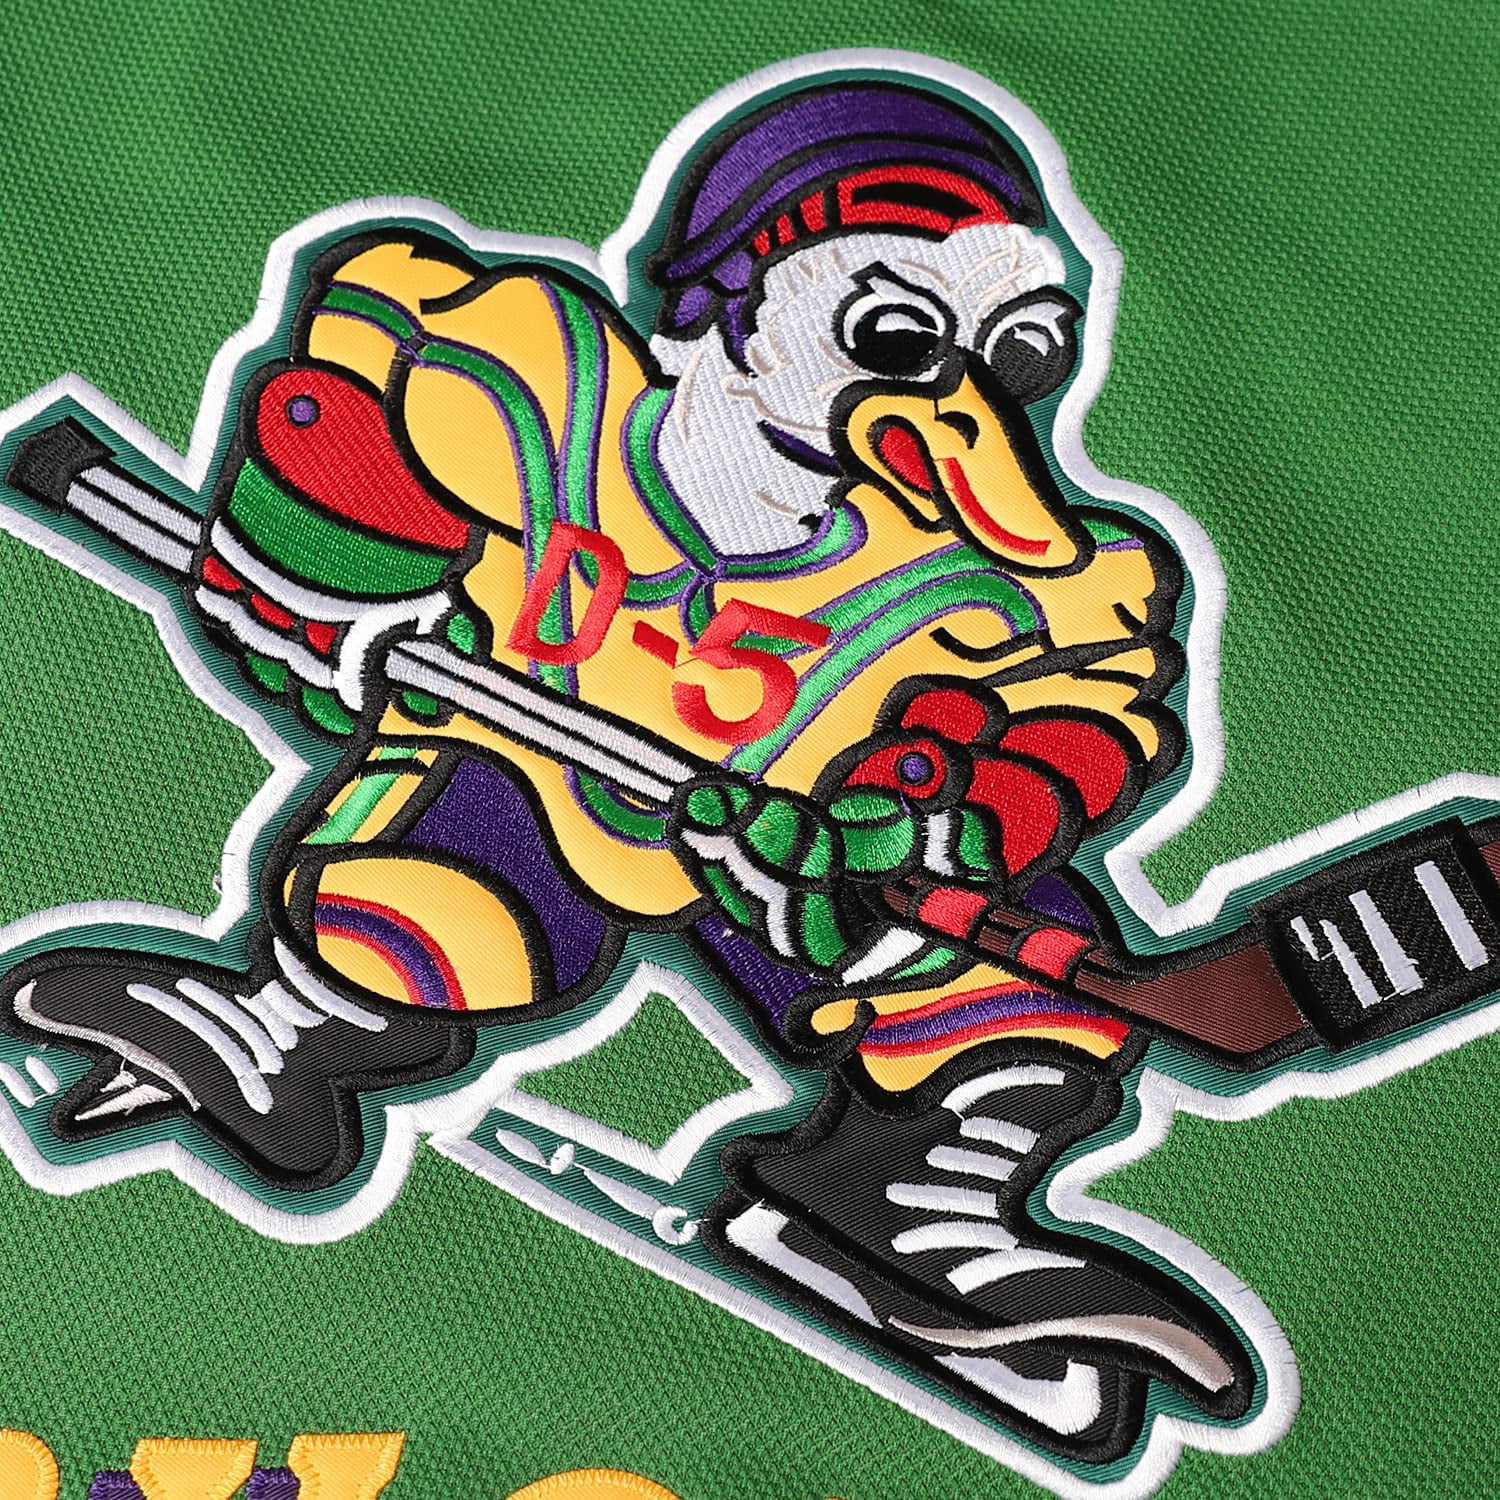 COZOK The Mighty Ducks Movie Ice Hockey Jersey 96#Conway Stitched White Long Sleeve